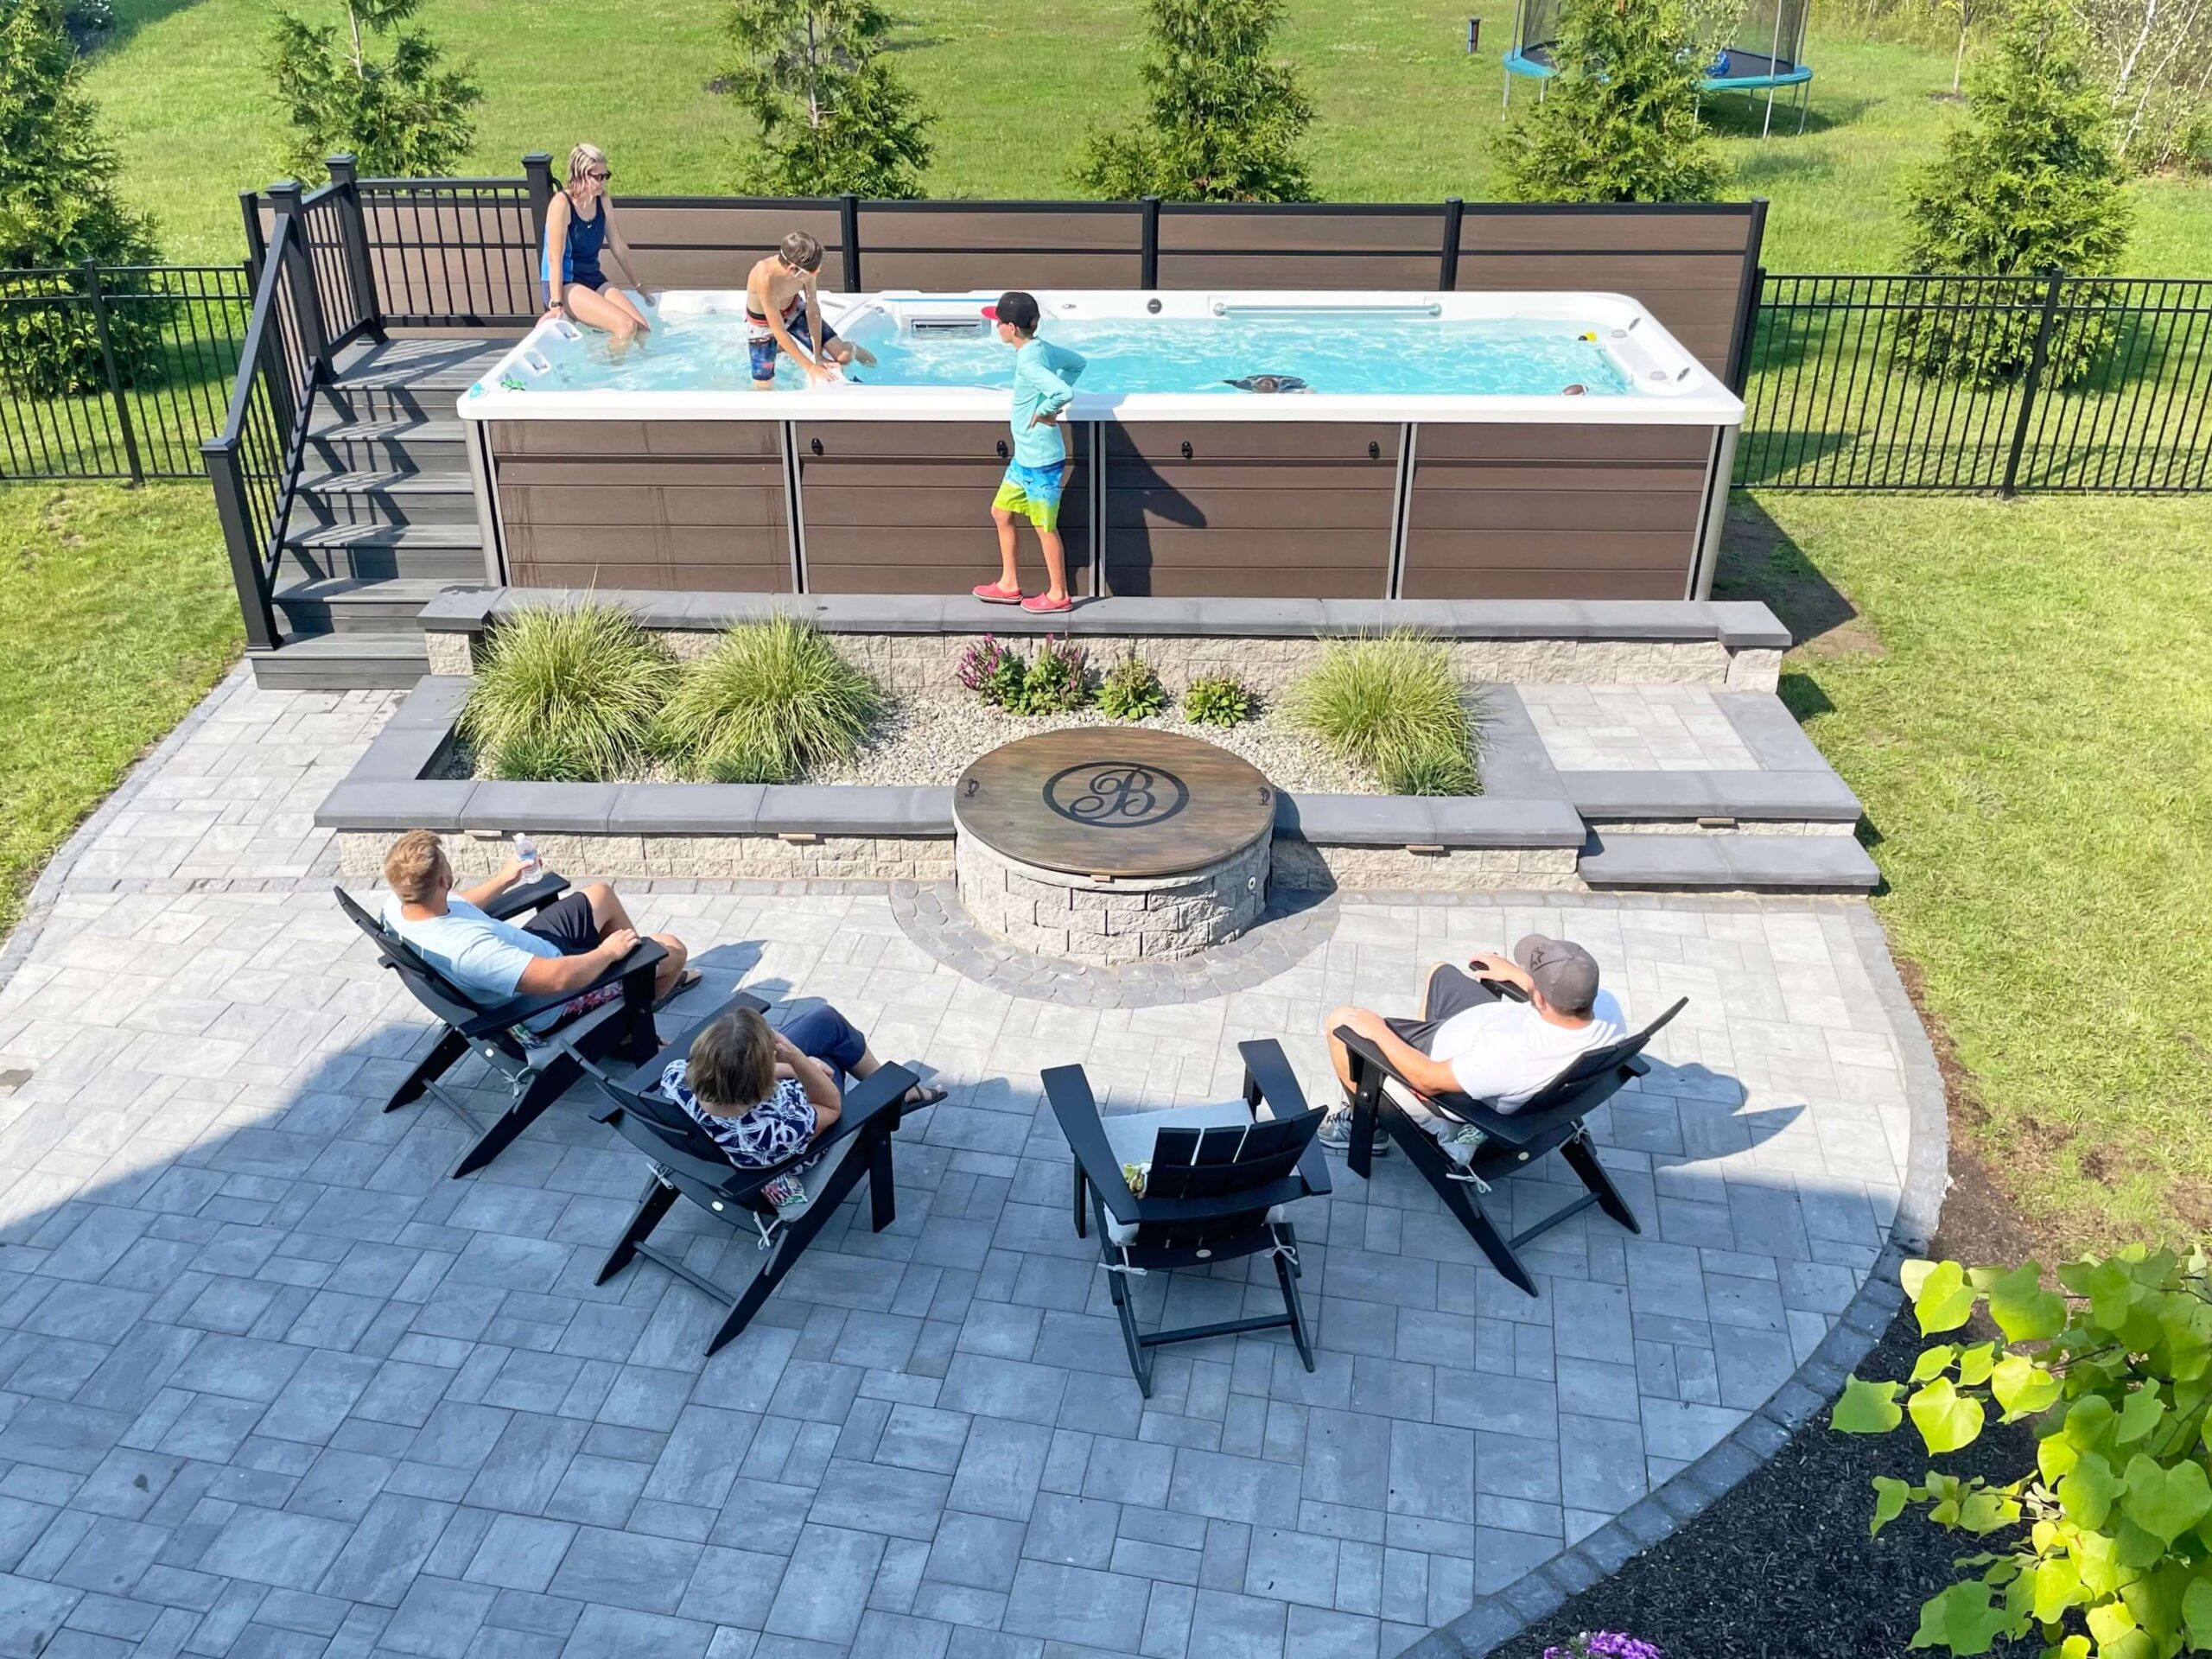 Top 5 Reasons to Invest in an Endless Pools Swim Spa